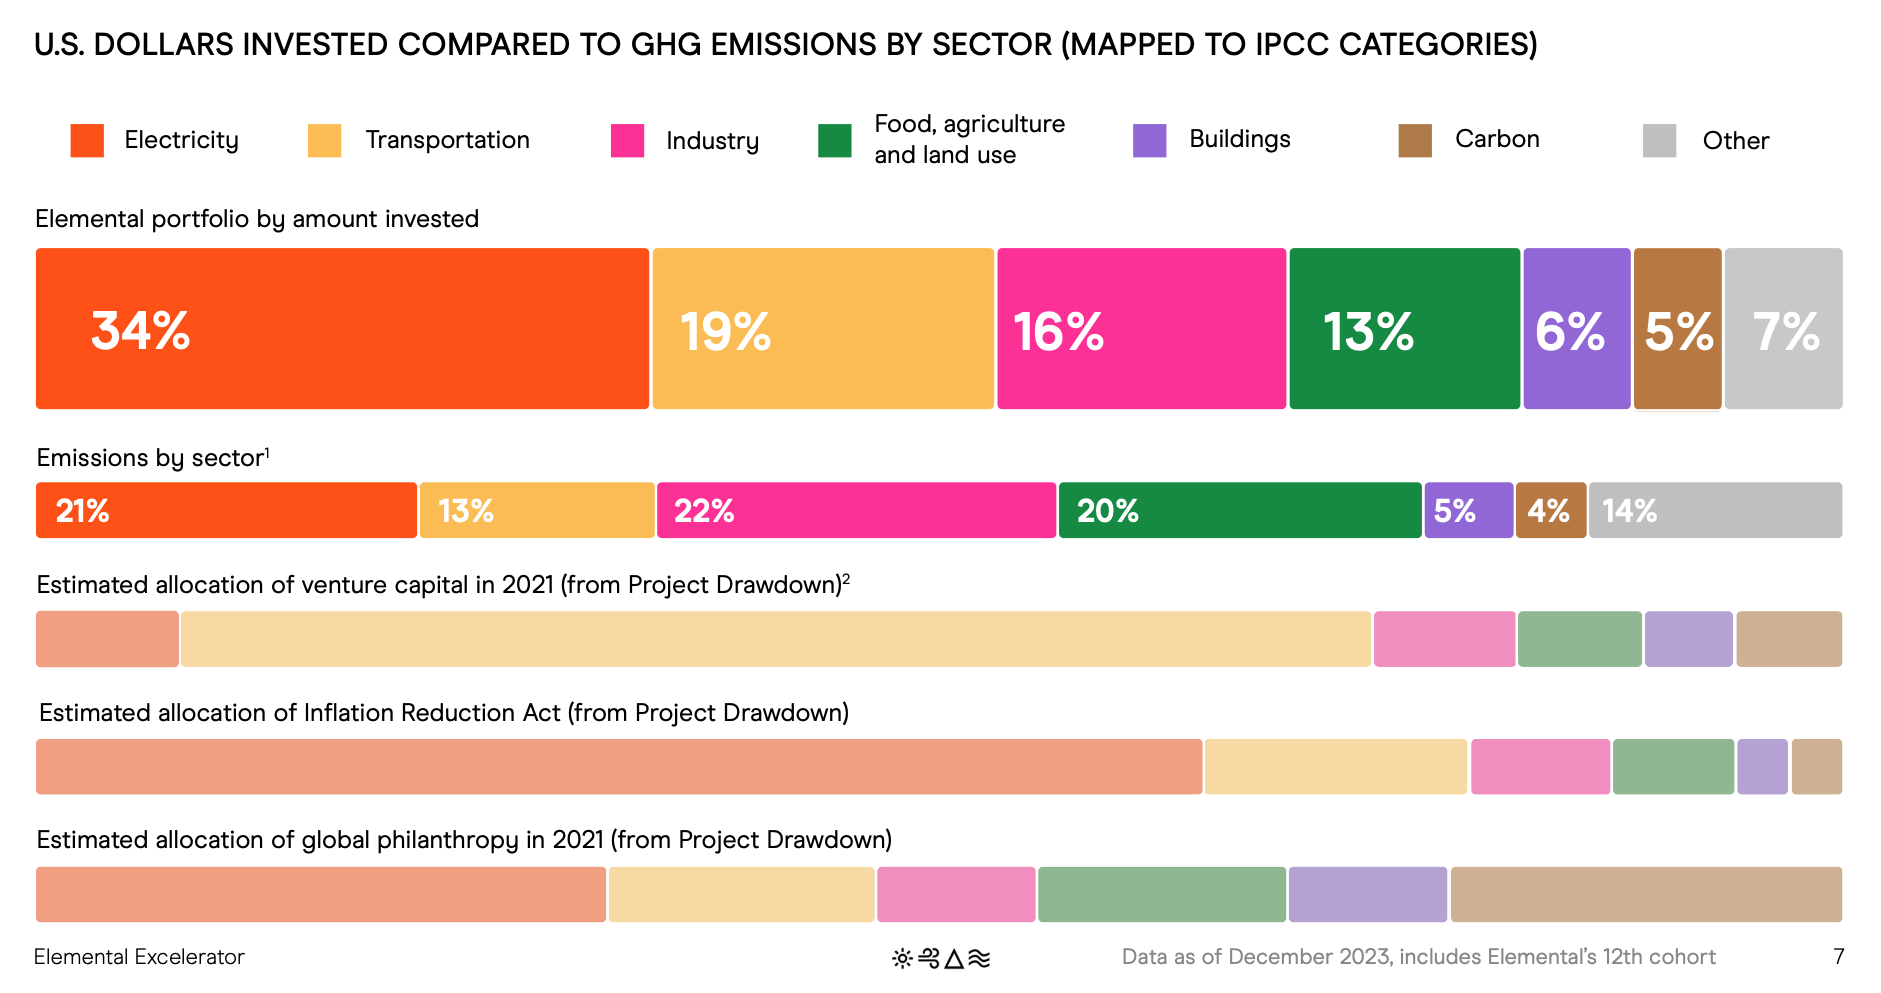 A data visualization of U.S. dollars invested compared to GHG emissions by sector